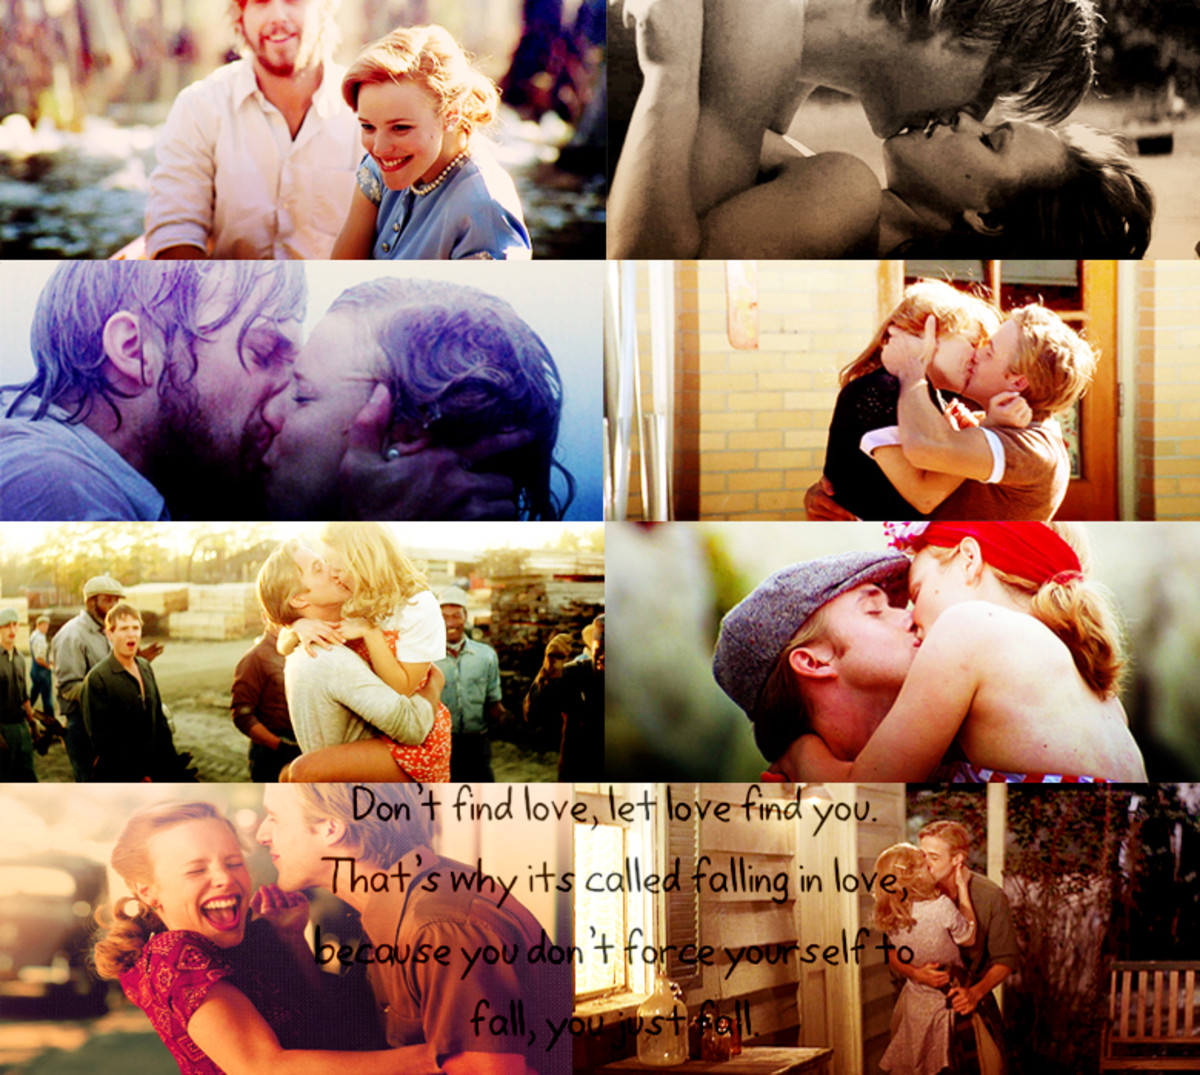 Romantic still shots from the film The Notebook. 